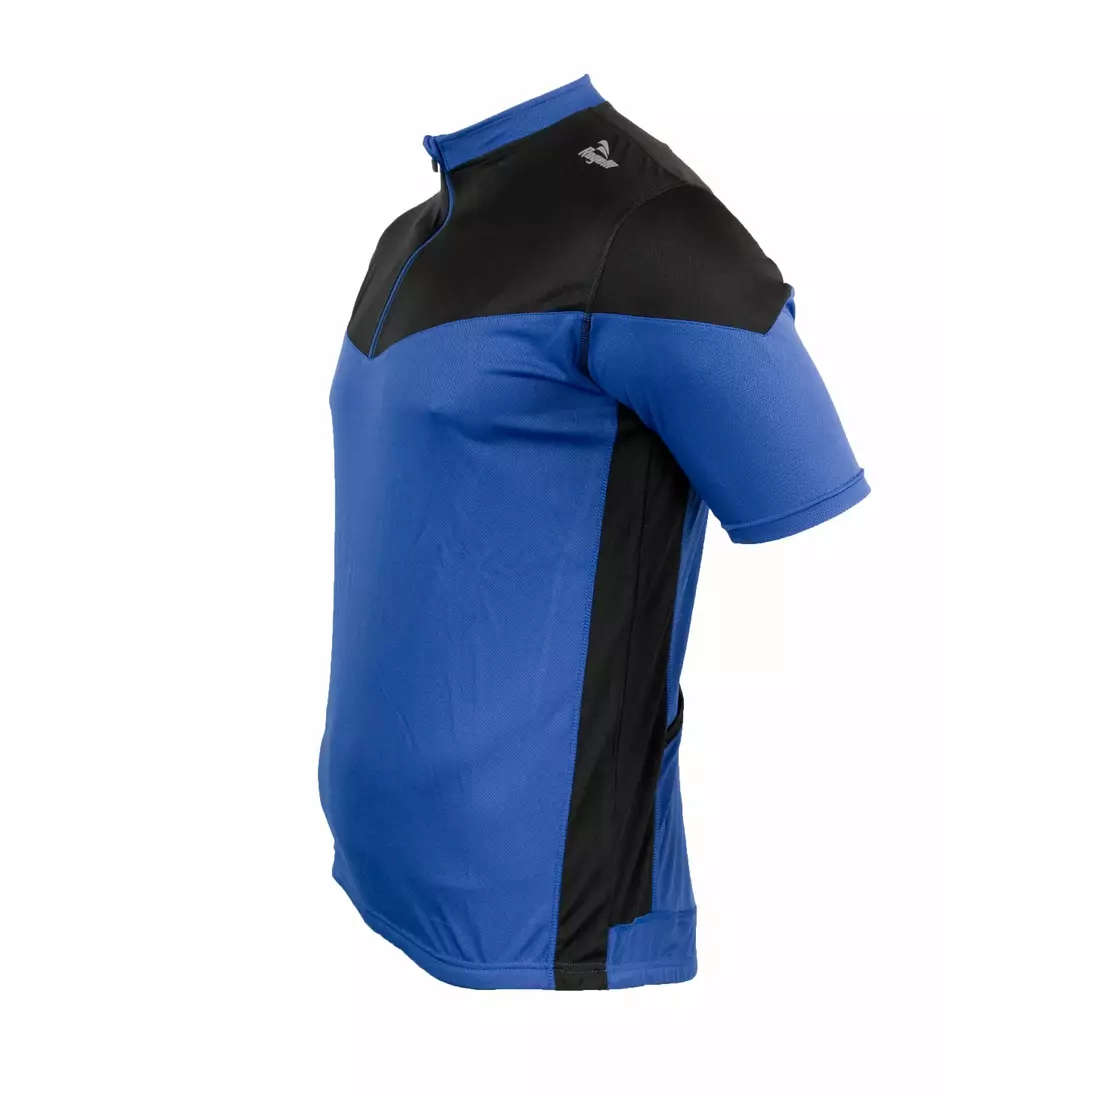 ROGELLI MAZZIN cycling jersey 001.060, Blue and black